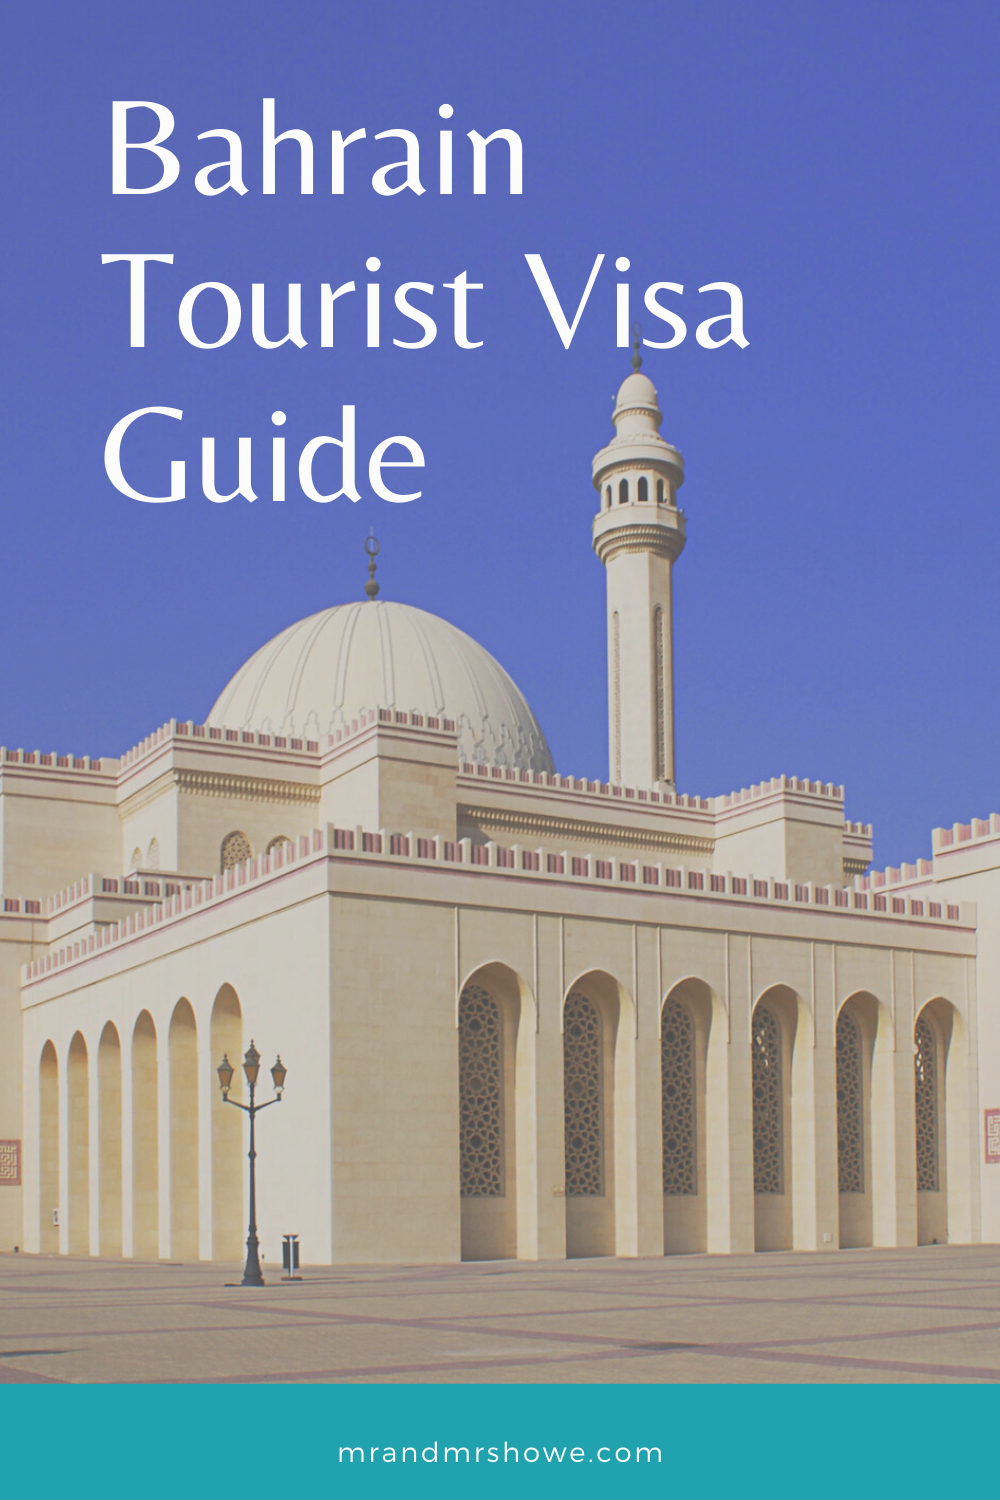 How To Get A Bahrain Tourist Visa With Your Philippines Passport1.png